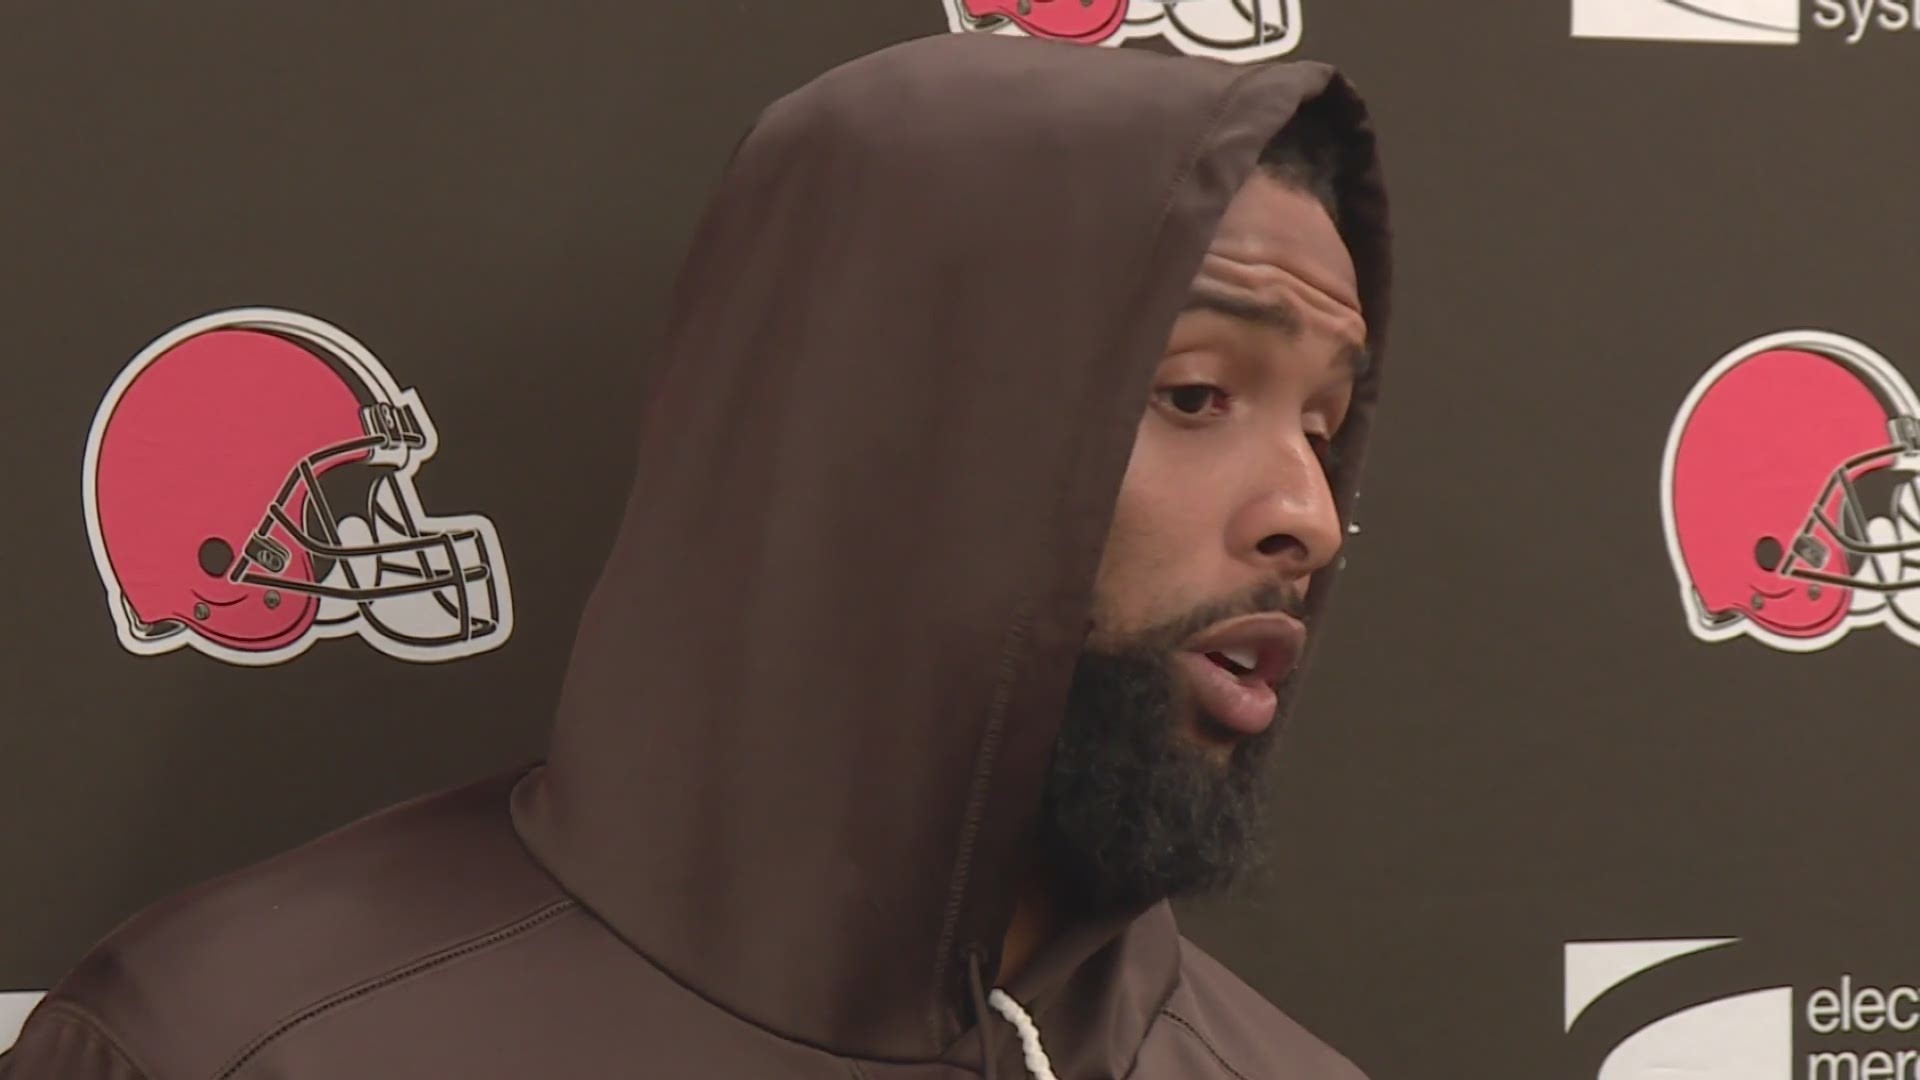 The Browns visit the Ravens on Sunday, Sept. 29 in the first divisional matchup for both teams. Odell Beckham Jr. says it's an important game for Cleveland.